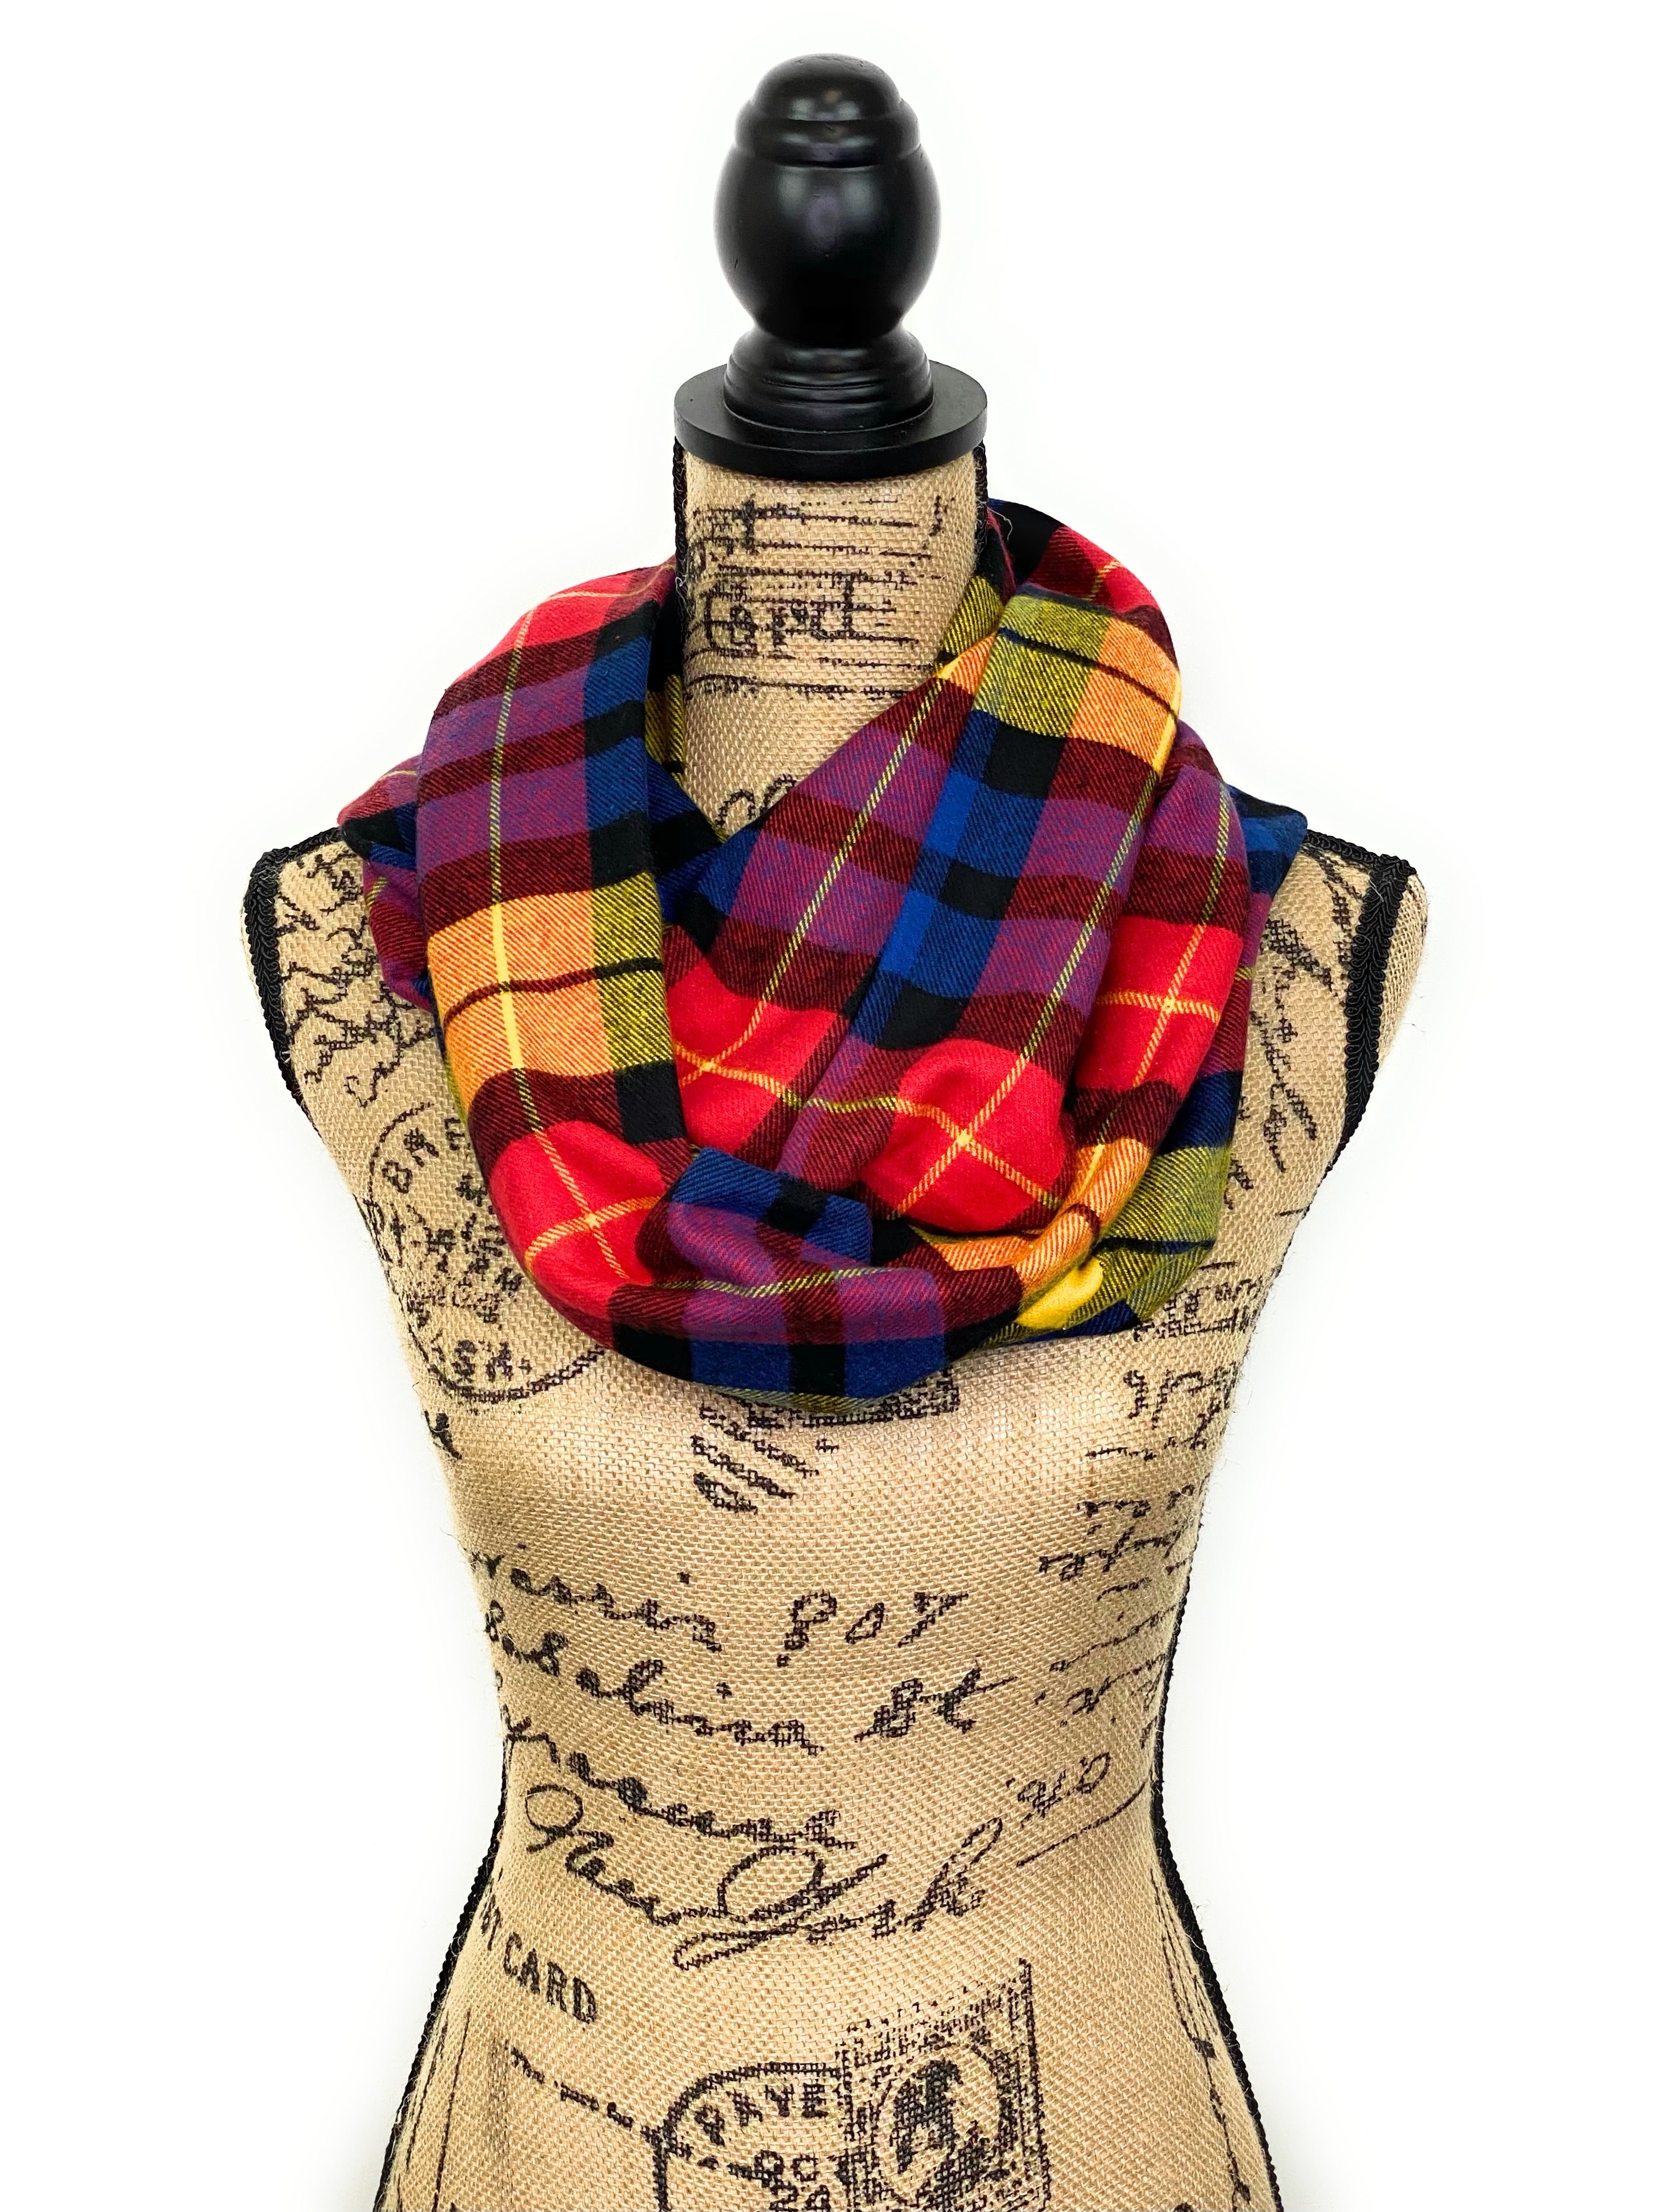 Colorful Yellow, Red, Blue, and Black Flannel Plaid Infinity or Blanket Scarf